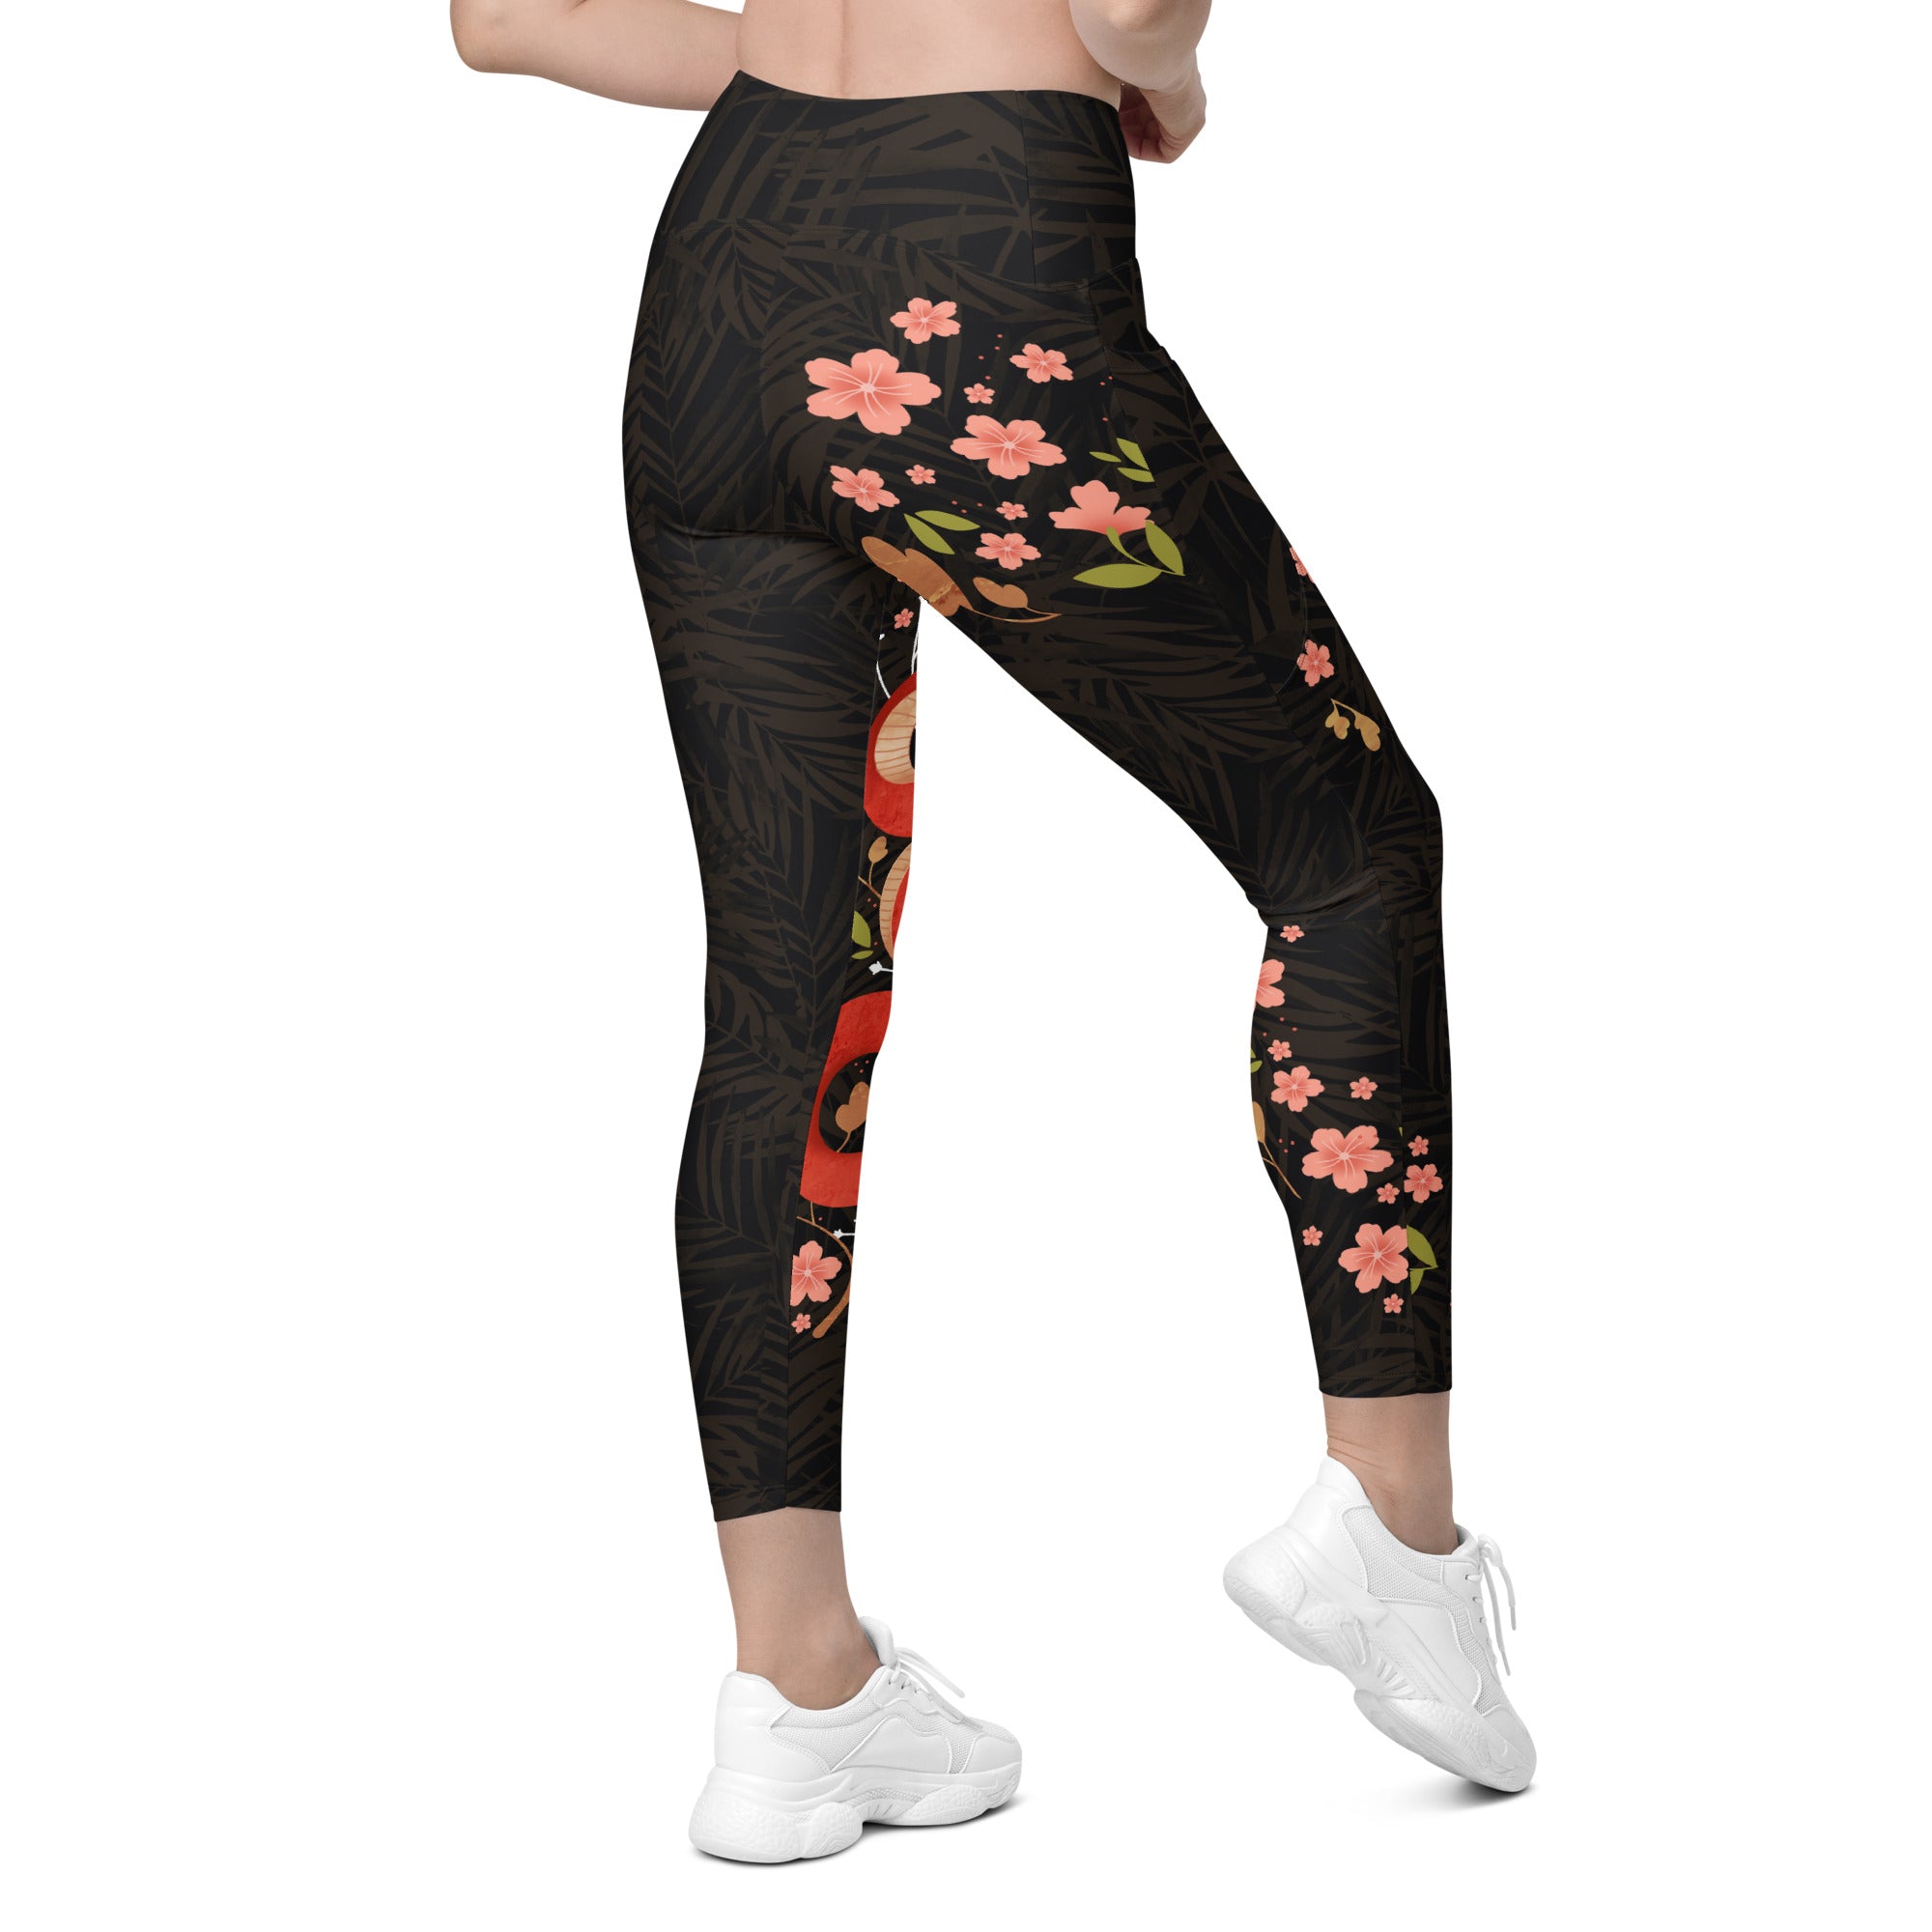 Snakes & Flowers Leggings With Pockets